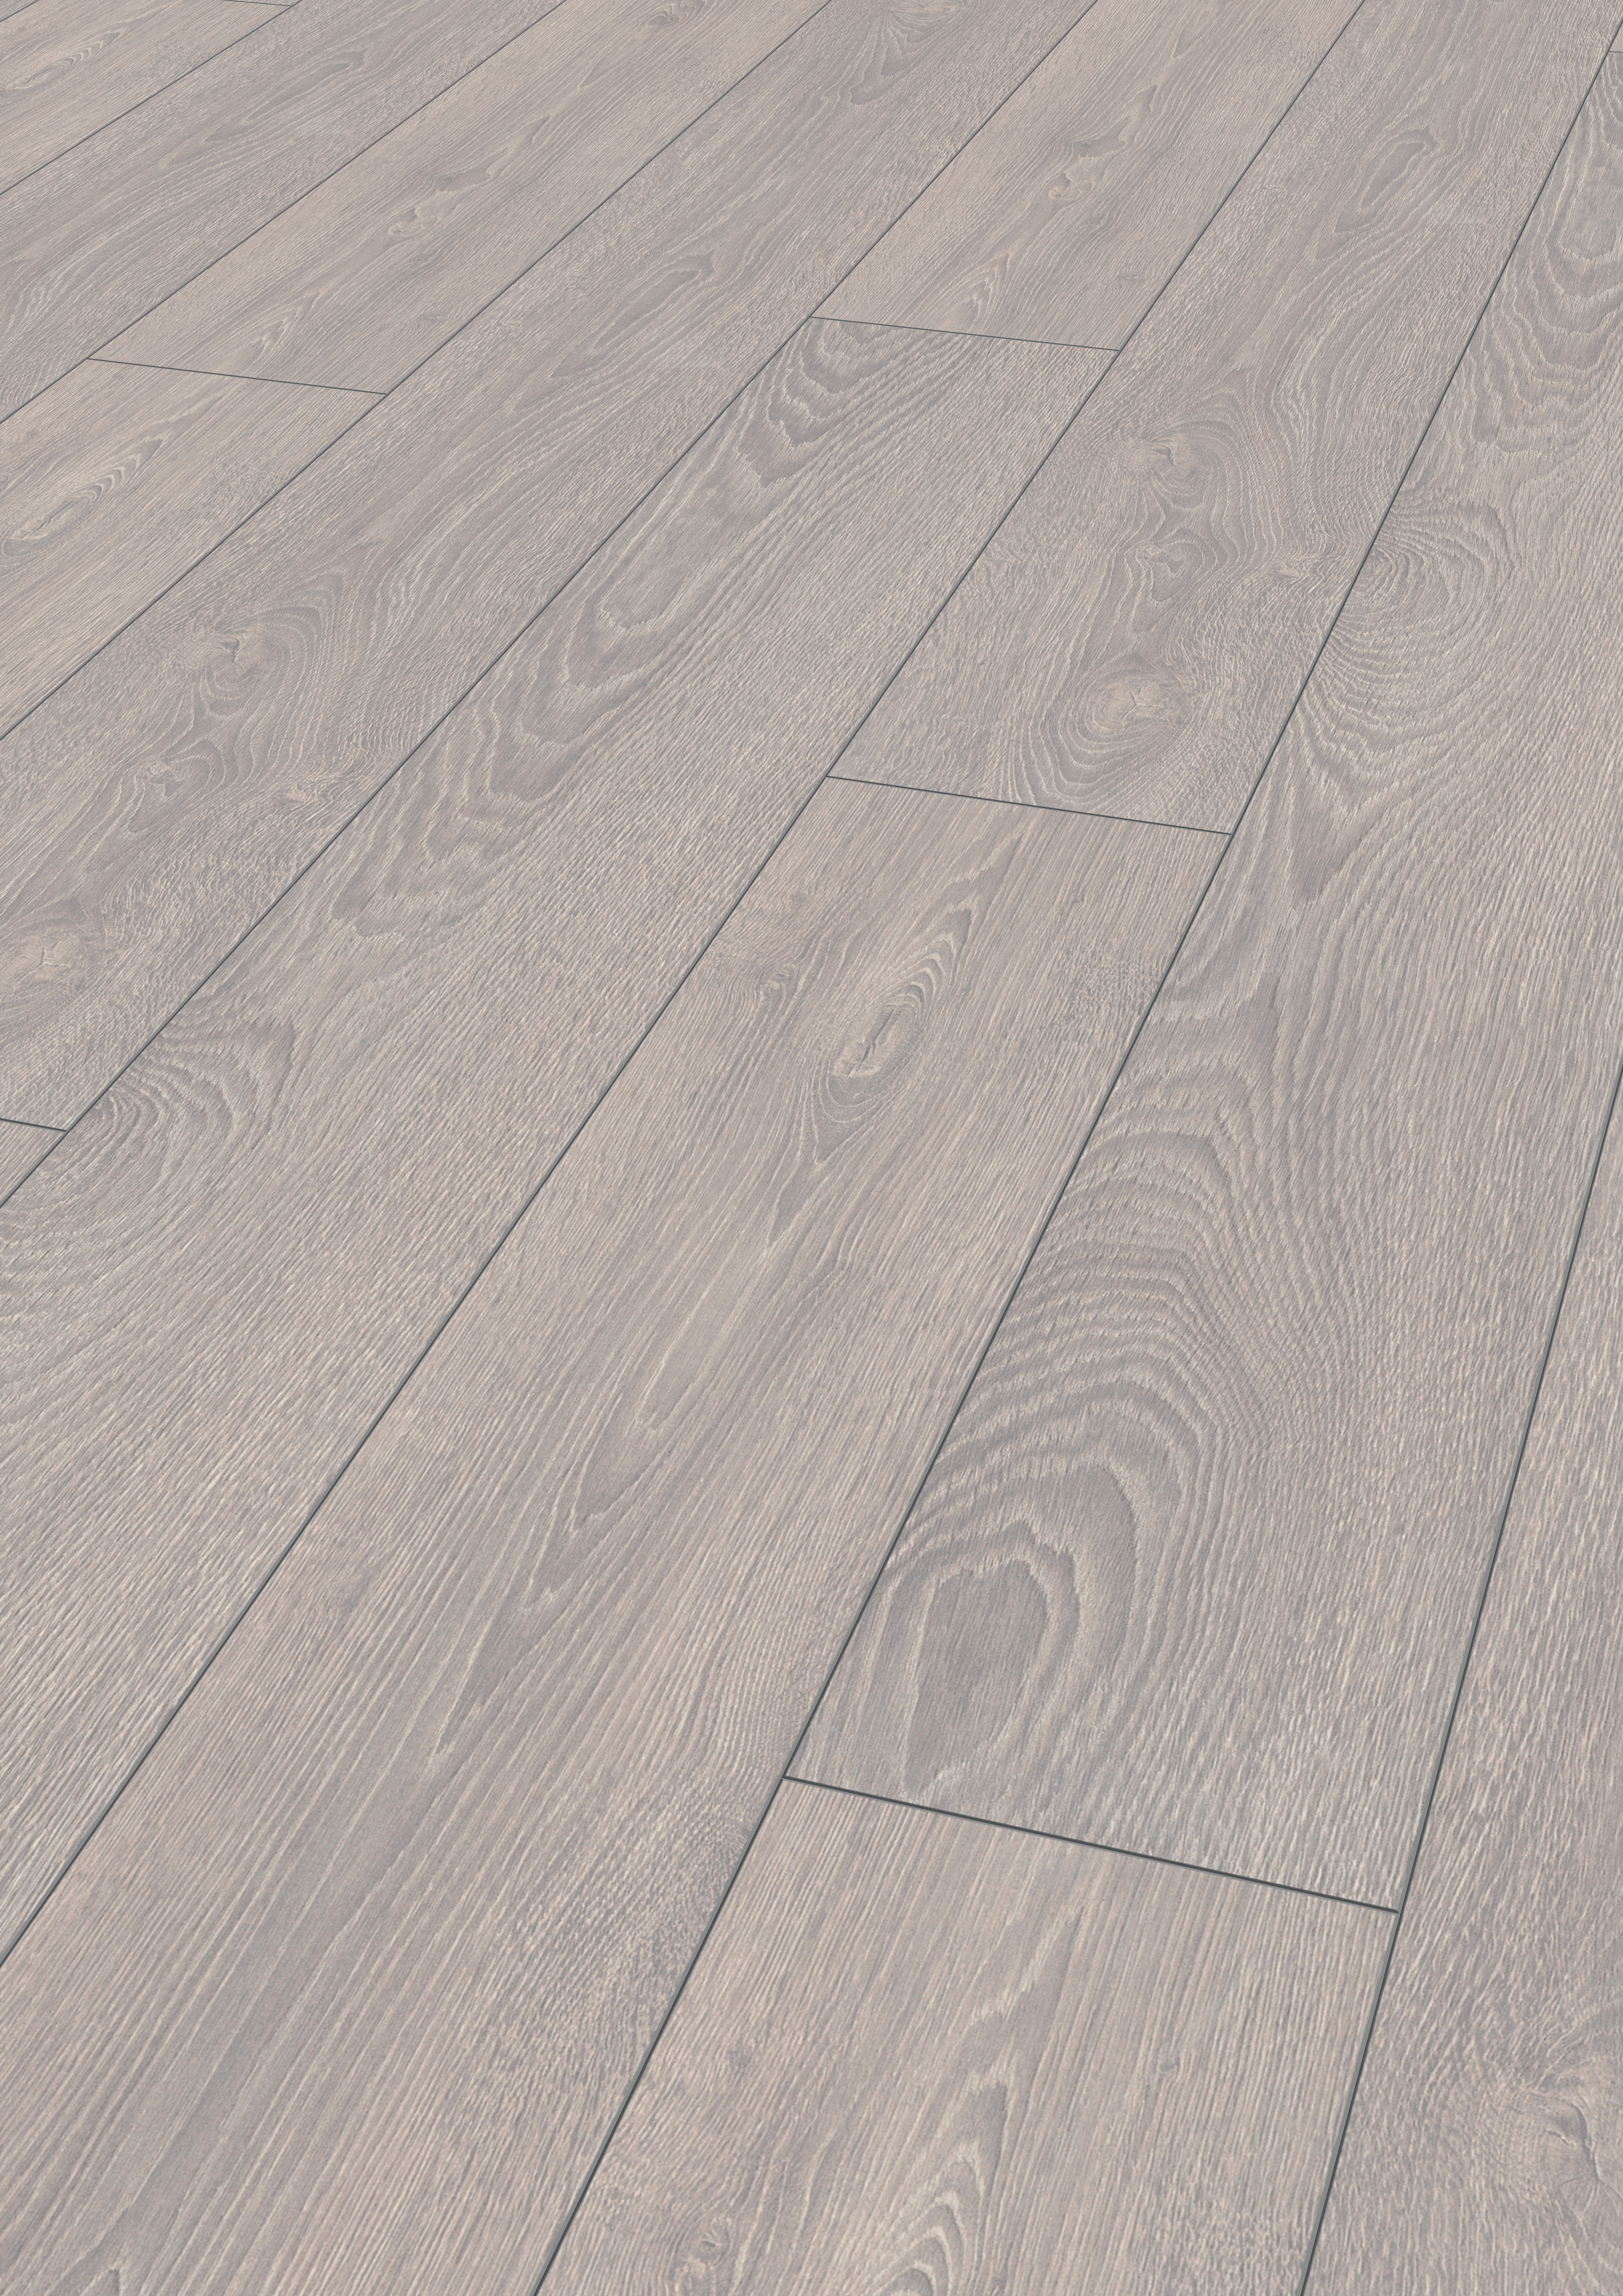 hardwood flooring for sale in canada of mammut laminate flooring in country house plank style kronotex within download picture